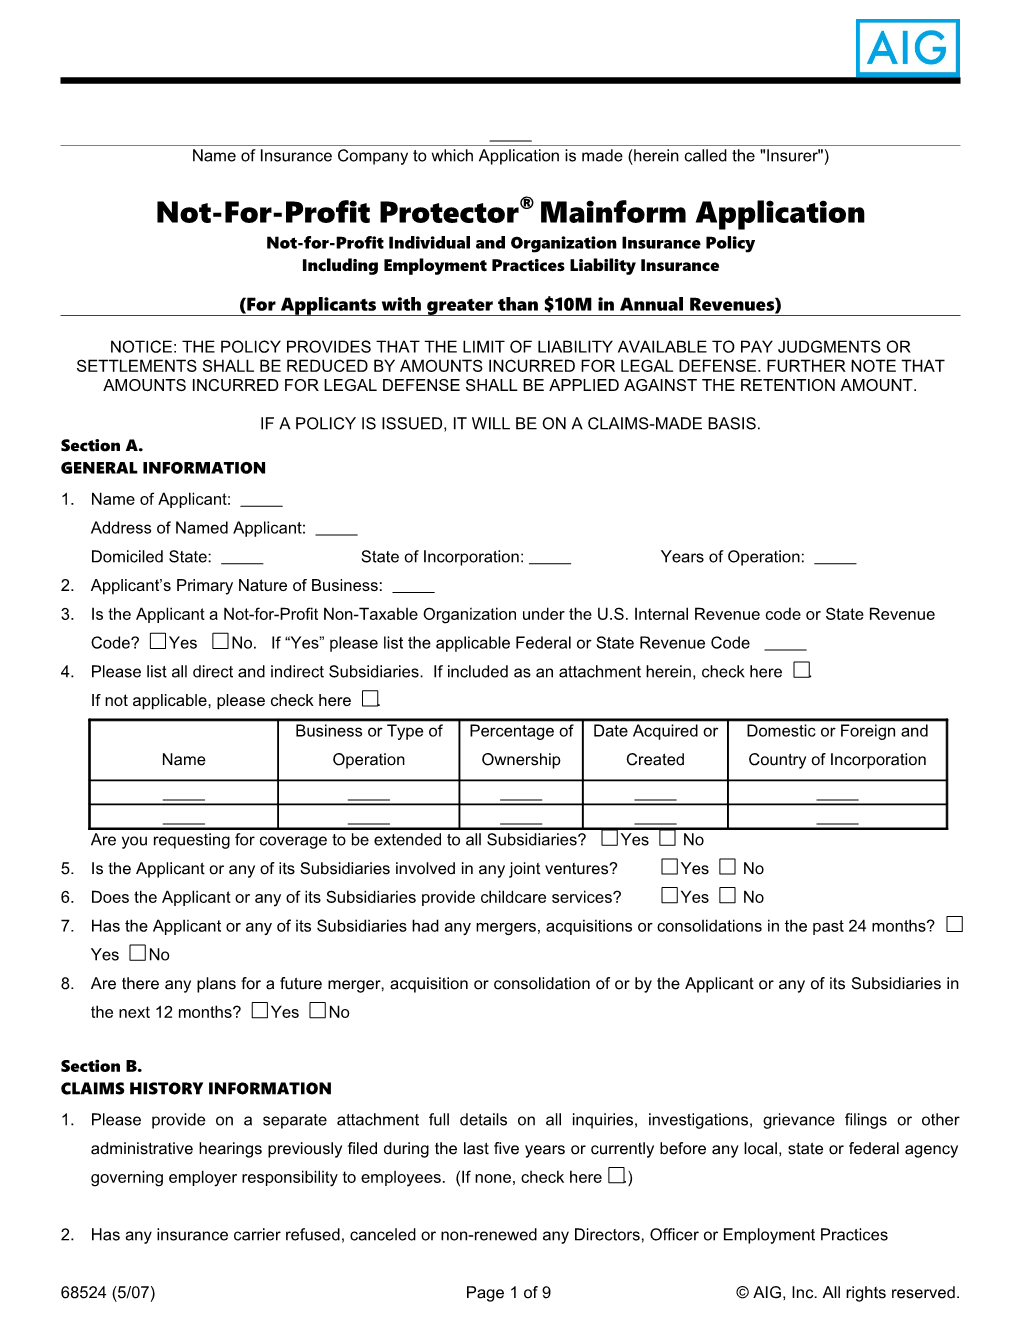 Not-For-Profit Protector Mainform Application